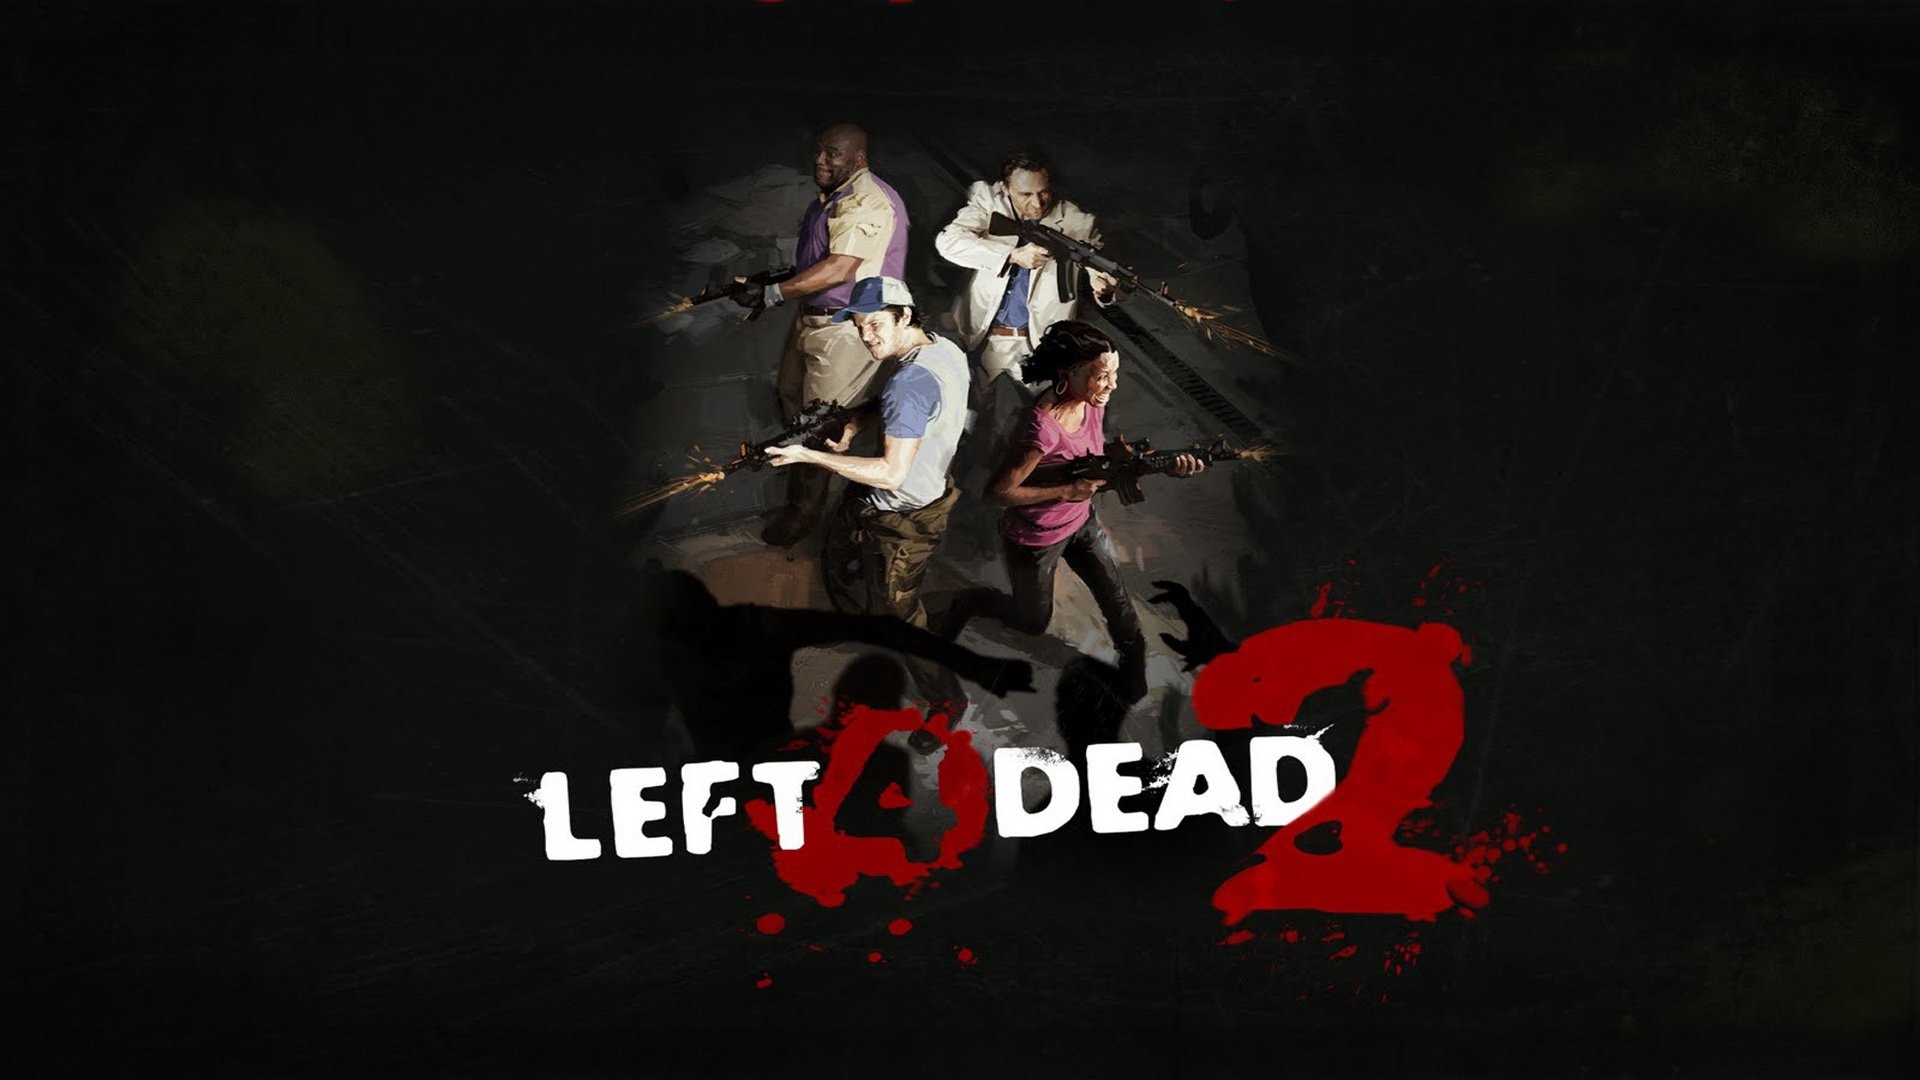 last S.T.A.R.S team SSS local server version (Mod) for Left 4 Dead 2 